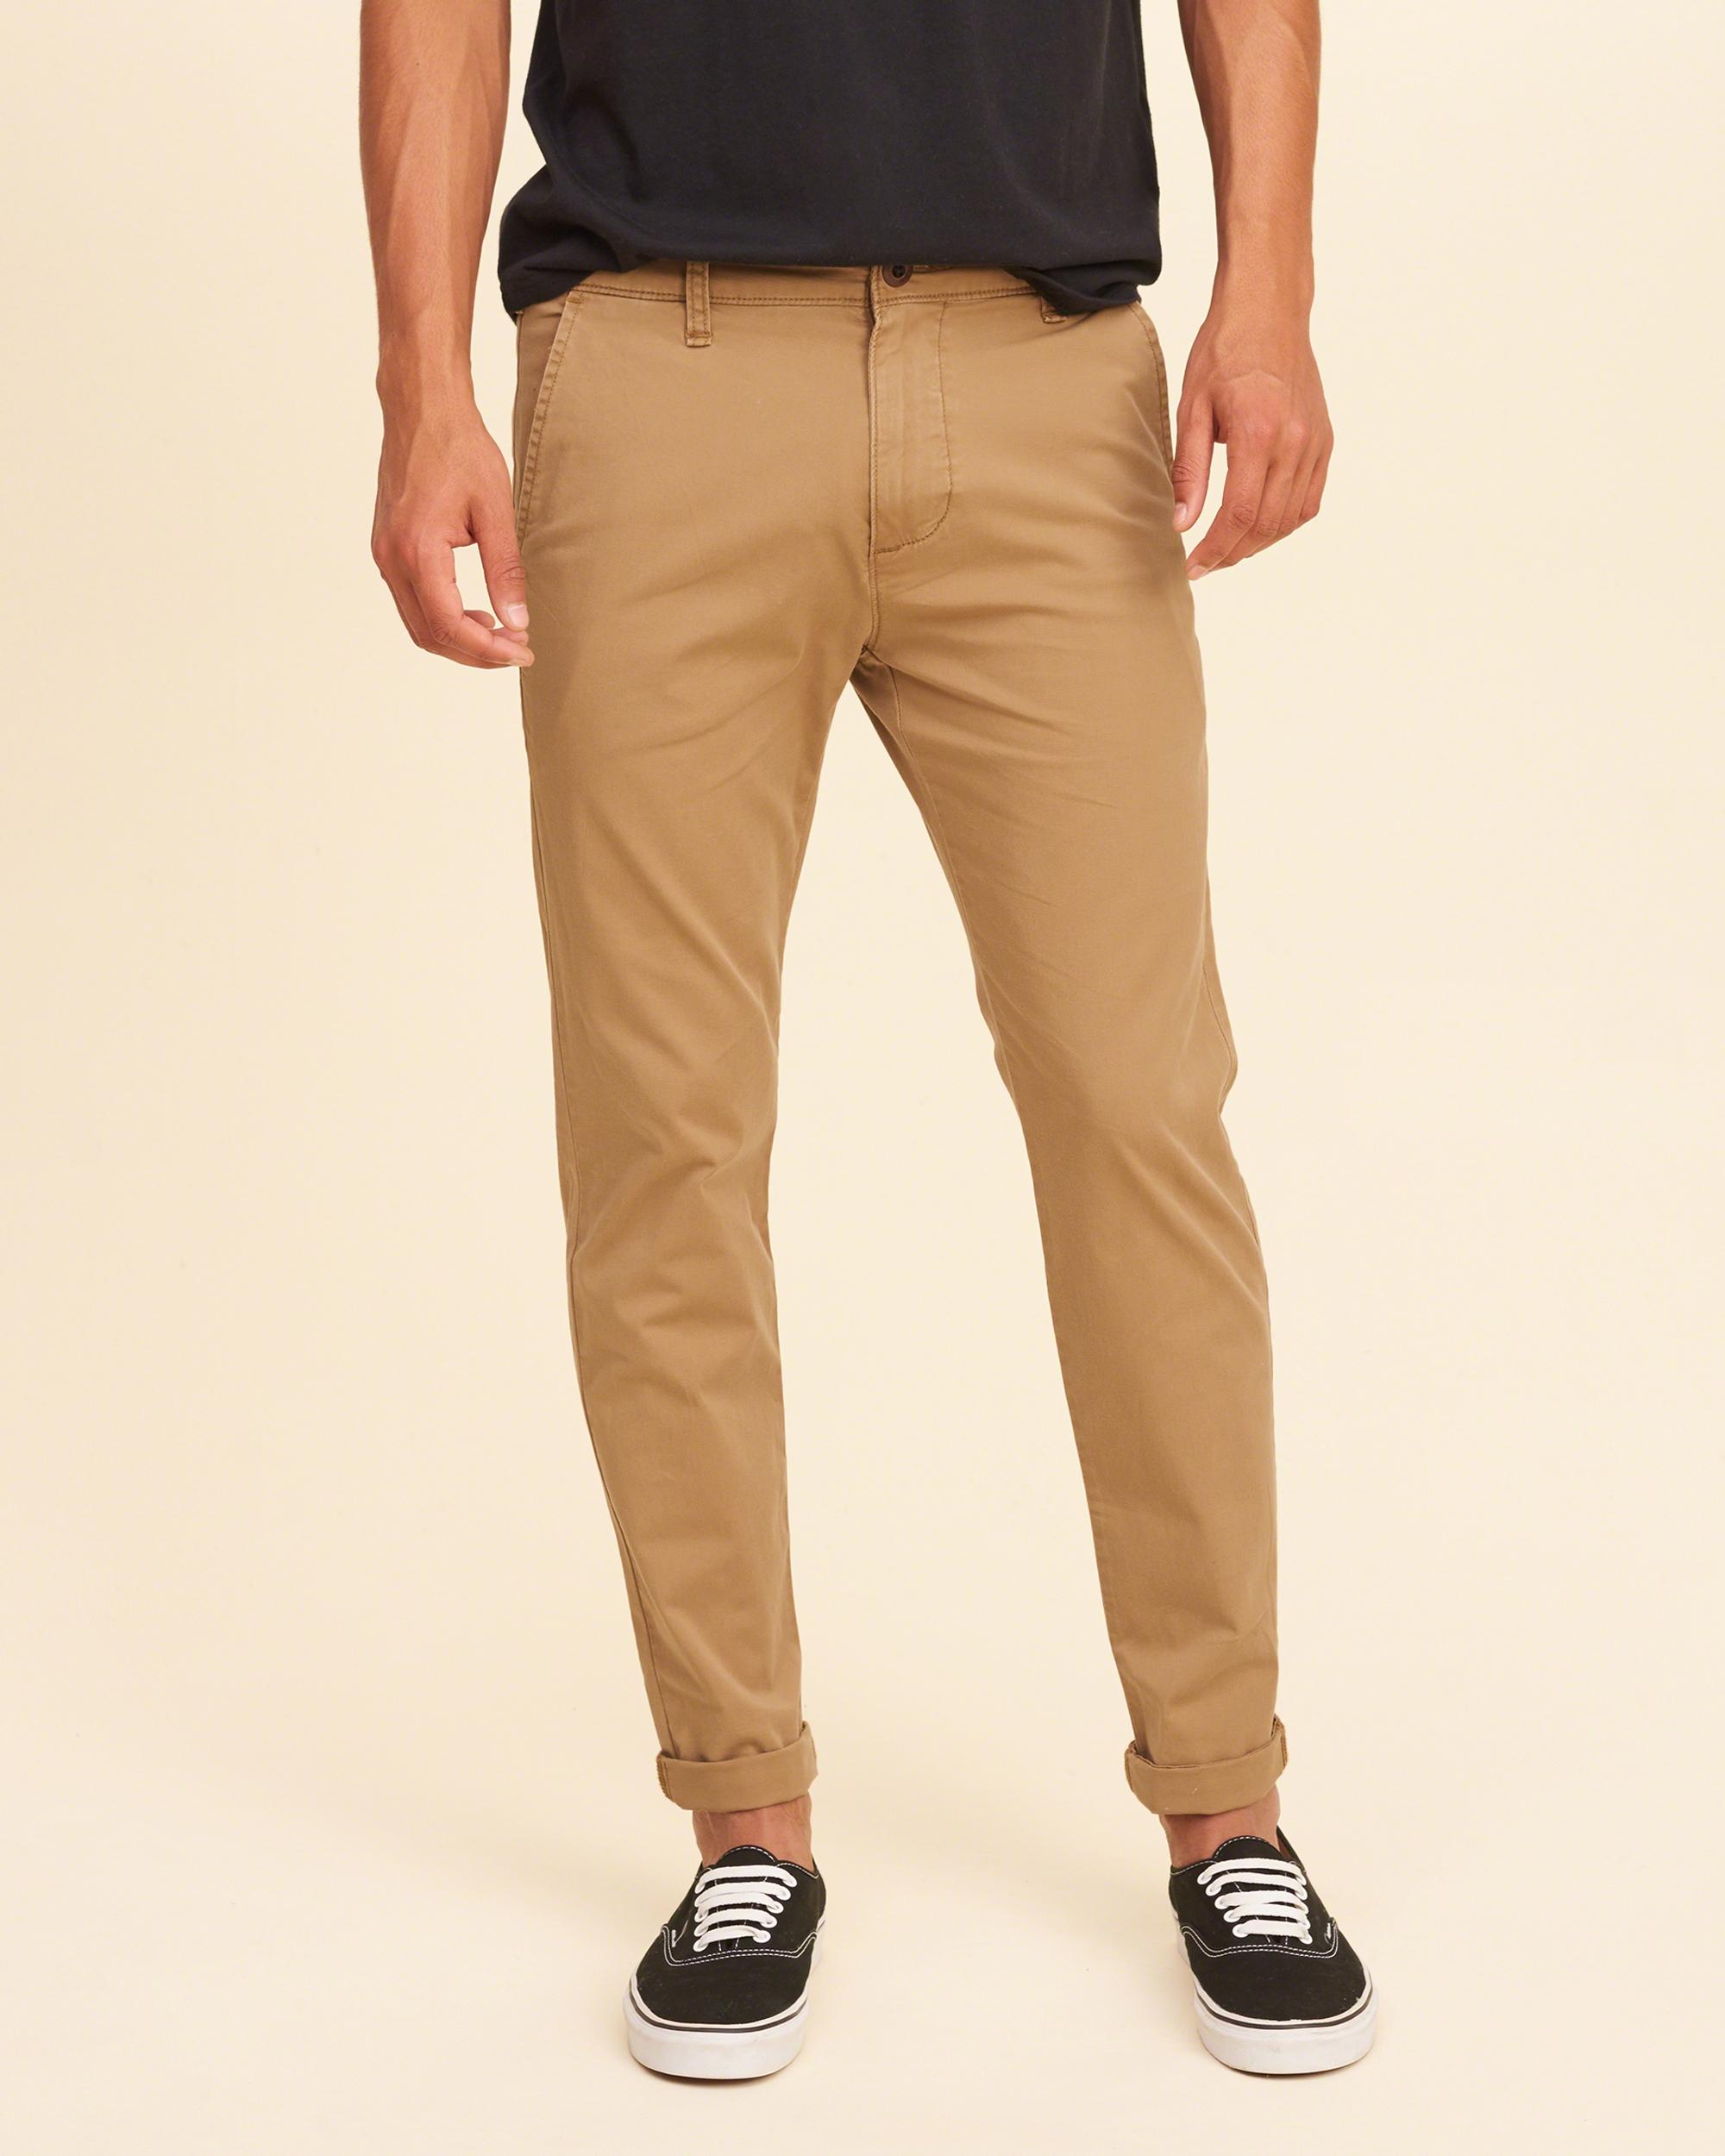 Lyst - Hollister Super Skinny Chinos in Natural for Men